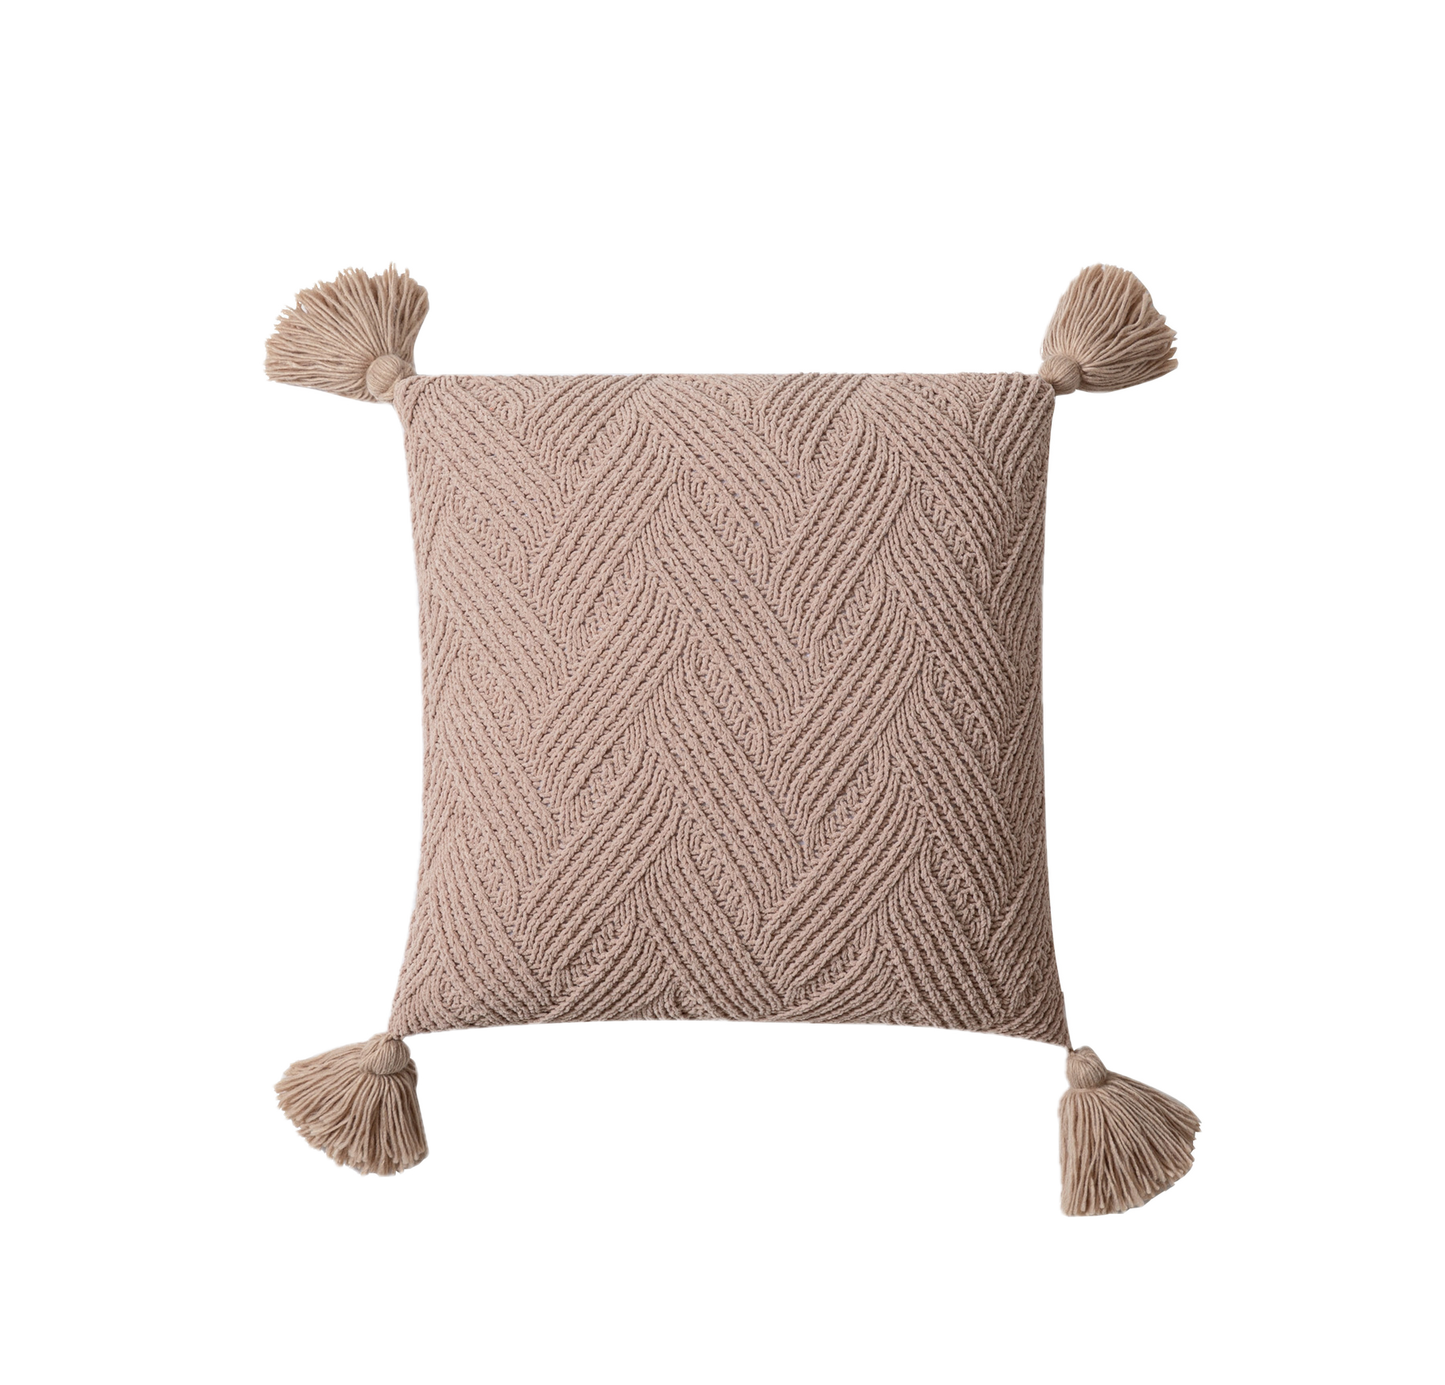 Knotted Pillow Covers 18x18 inch with Sliver Woven Pattern